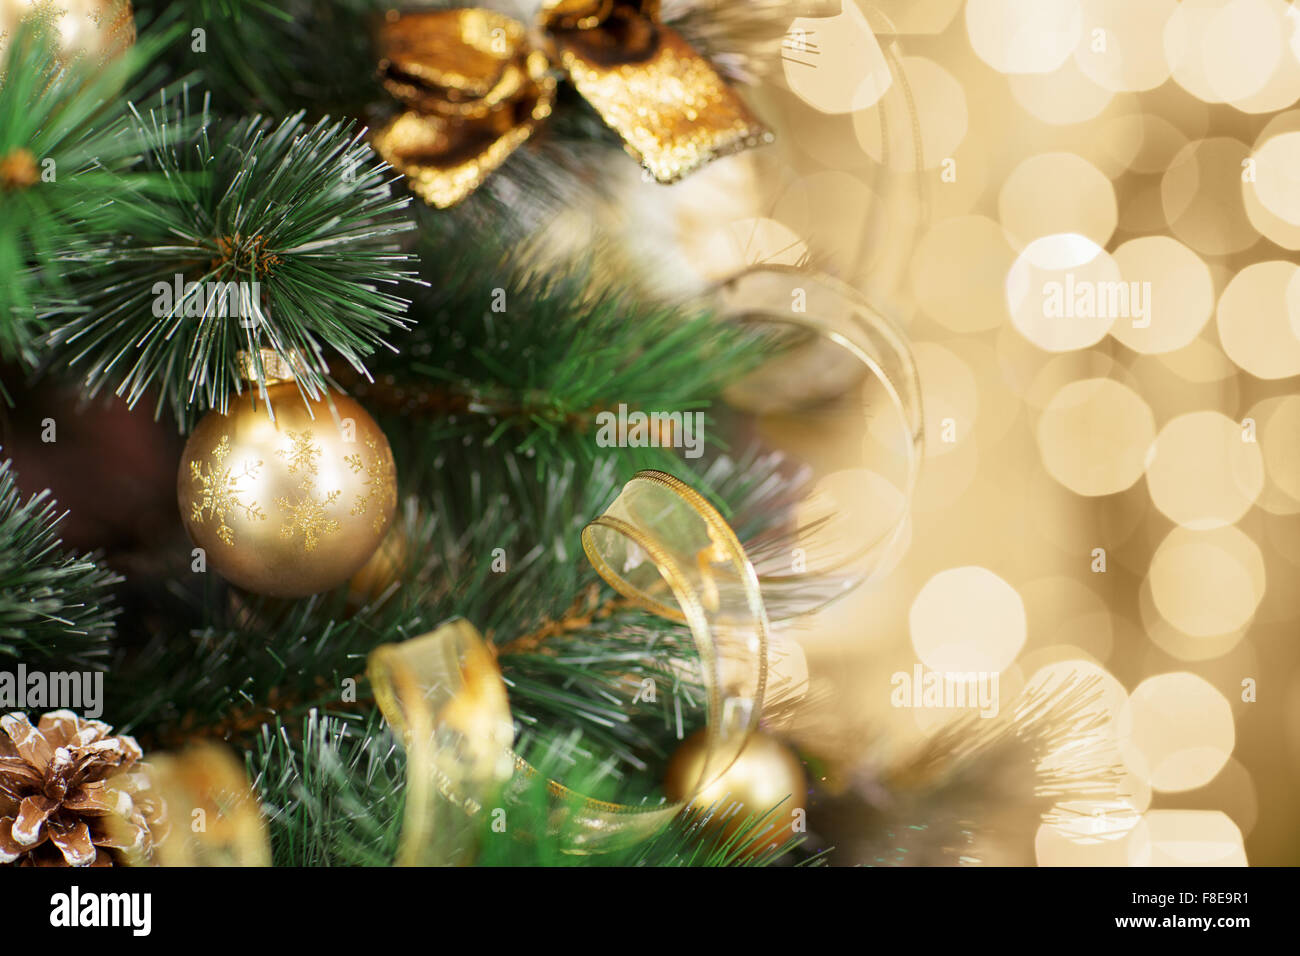 Christmas tree with gold blurred light background Stock Photo